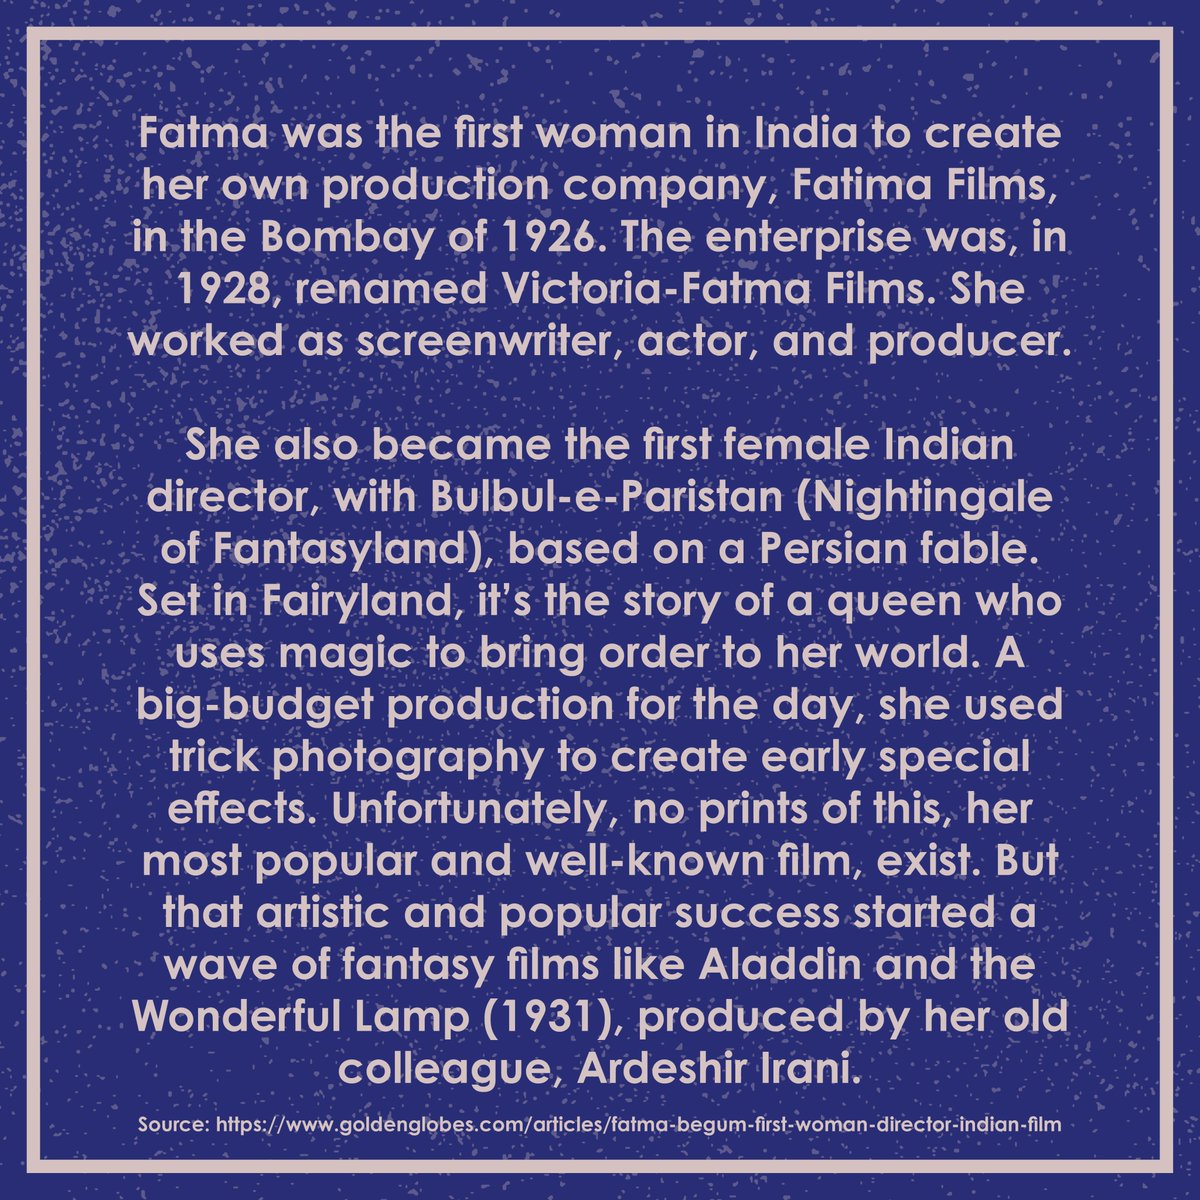 Before there was Bollywood, there was Fatma Begum, the FIRST female director in Indian cinema! 🌟 She founded her own production company and produced the first Indian film with special effects. #WomenInFilm #WHM2023 #CutterEntertainment #FemalePioneers #FatmaBegum #indiancinema